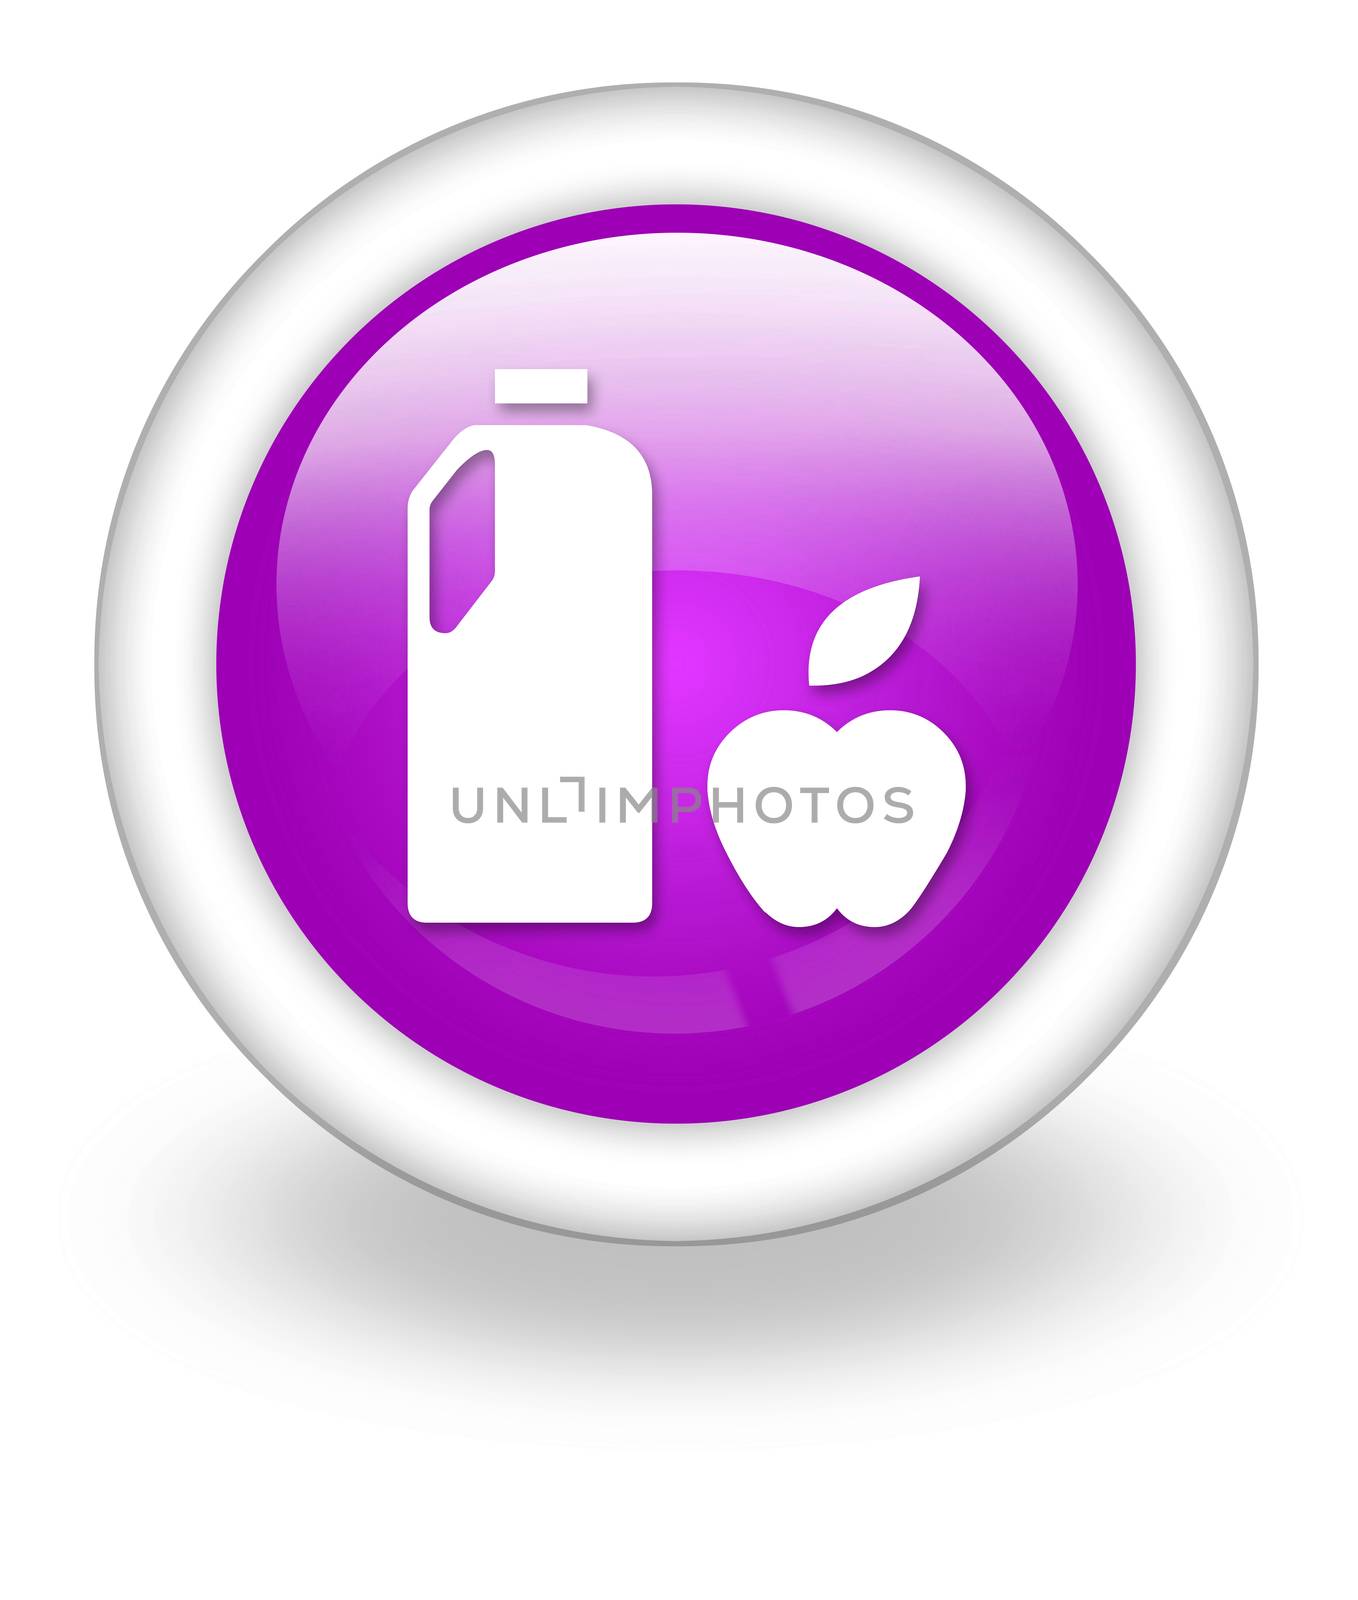 Icon, Button, Pictogram with Groceries symbol